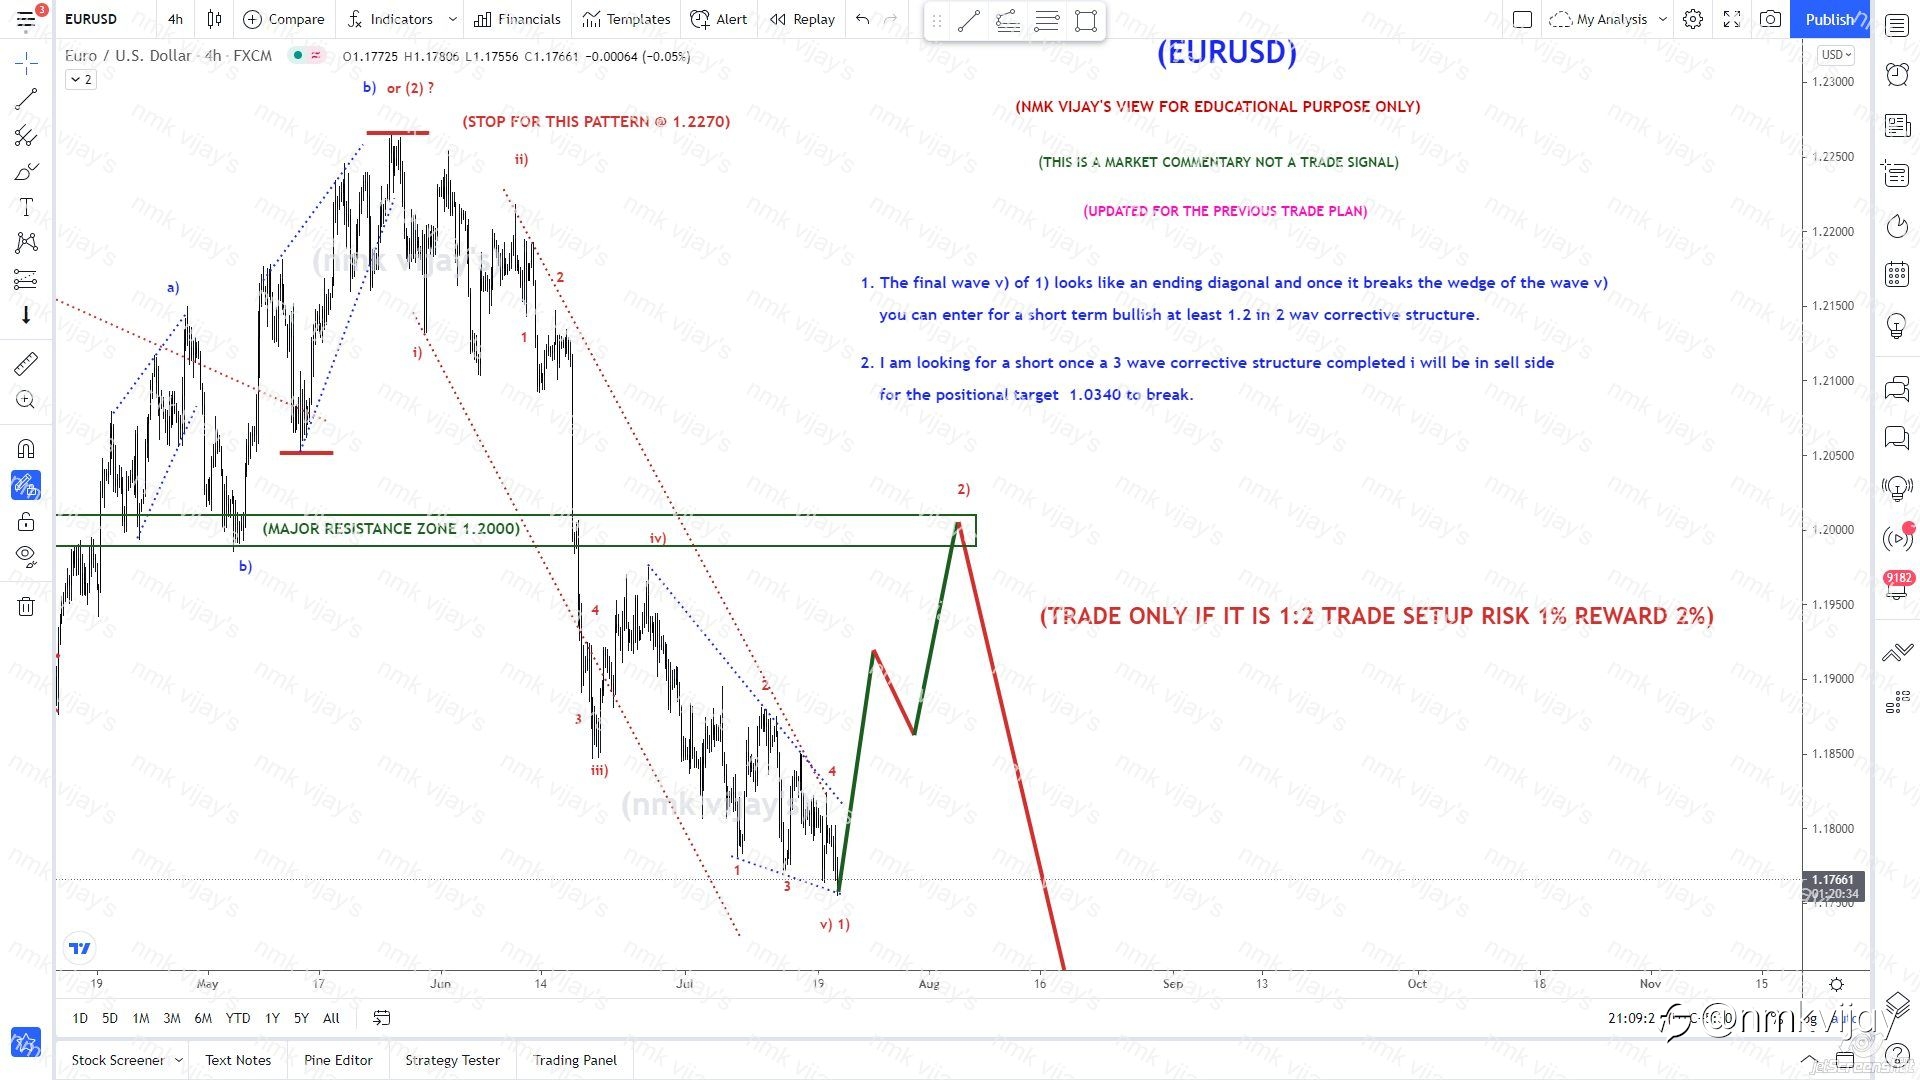 EURUSD-Looking like wave v) is an ending diagonal and bounce for correction to 1.2 in 3 waves ?